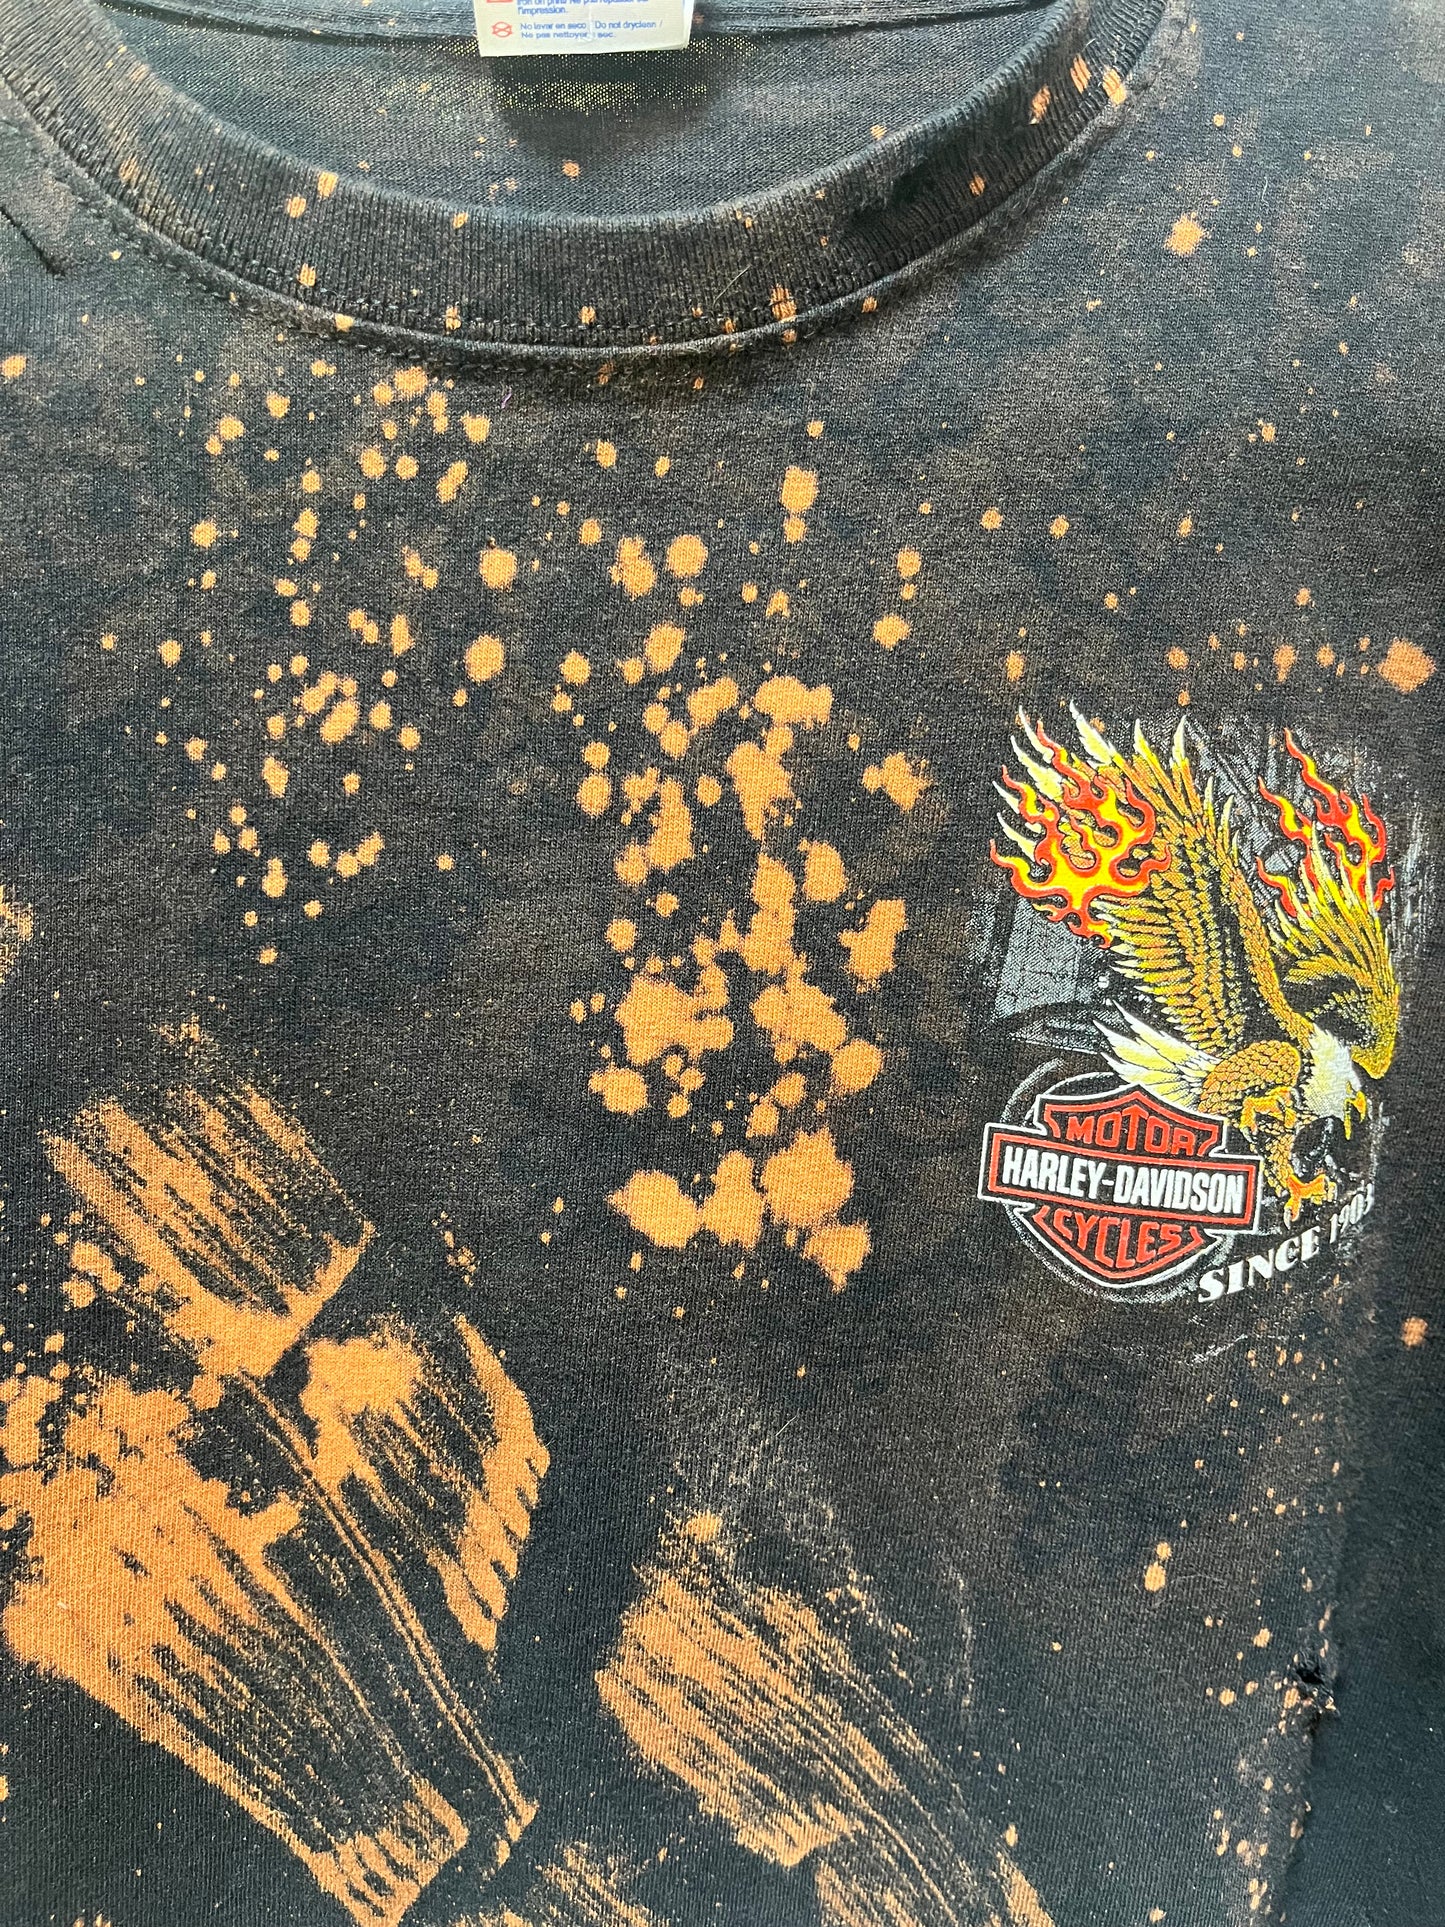 Vintage Harley Davidson Cropped Tee - MEXICO